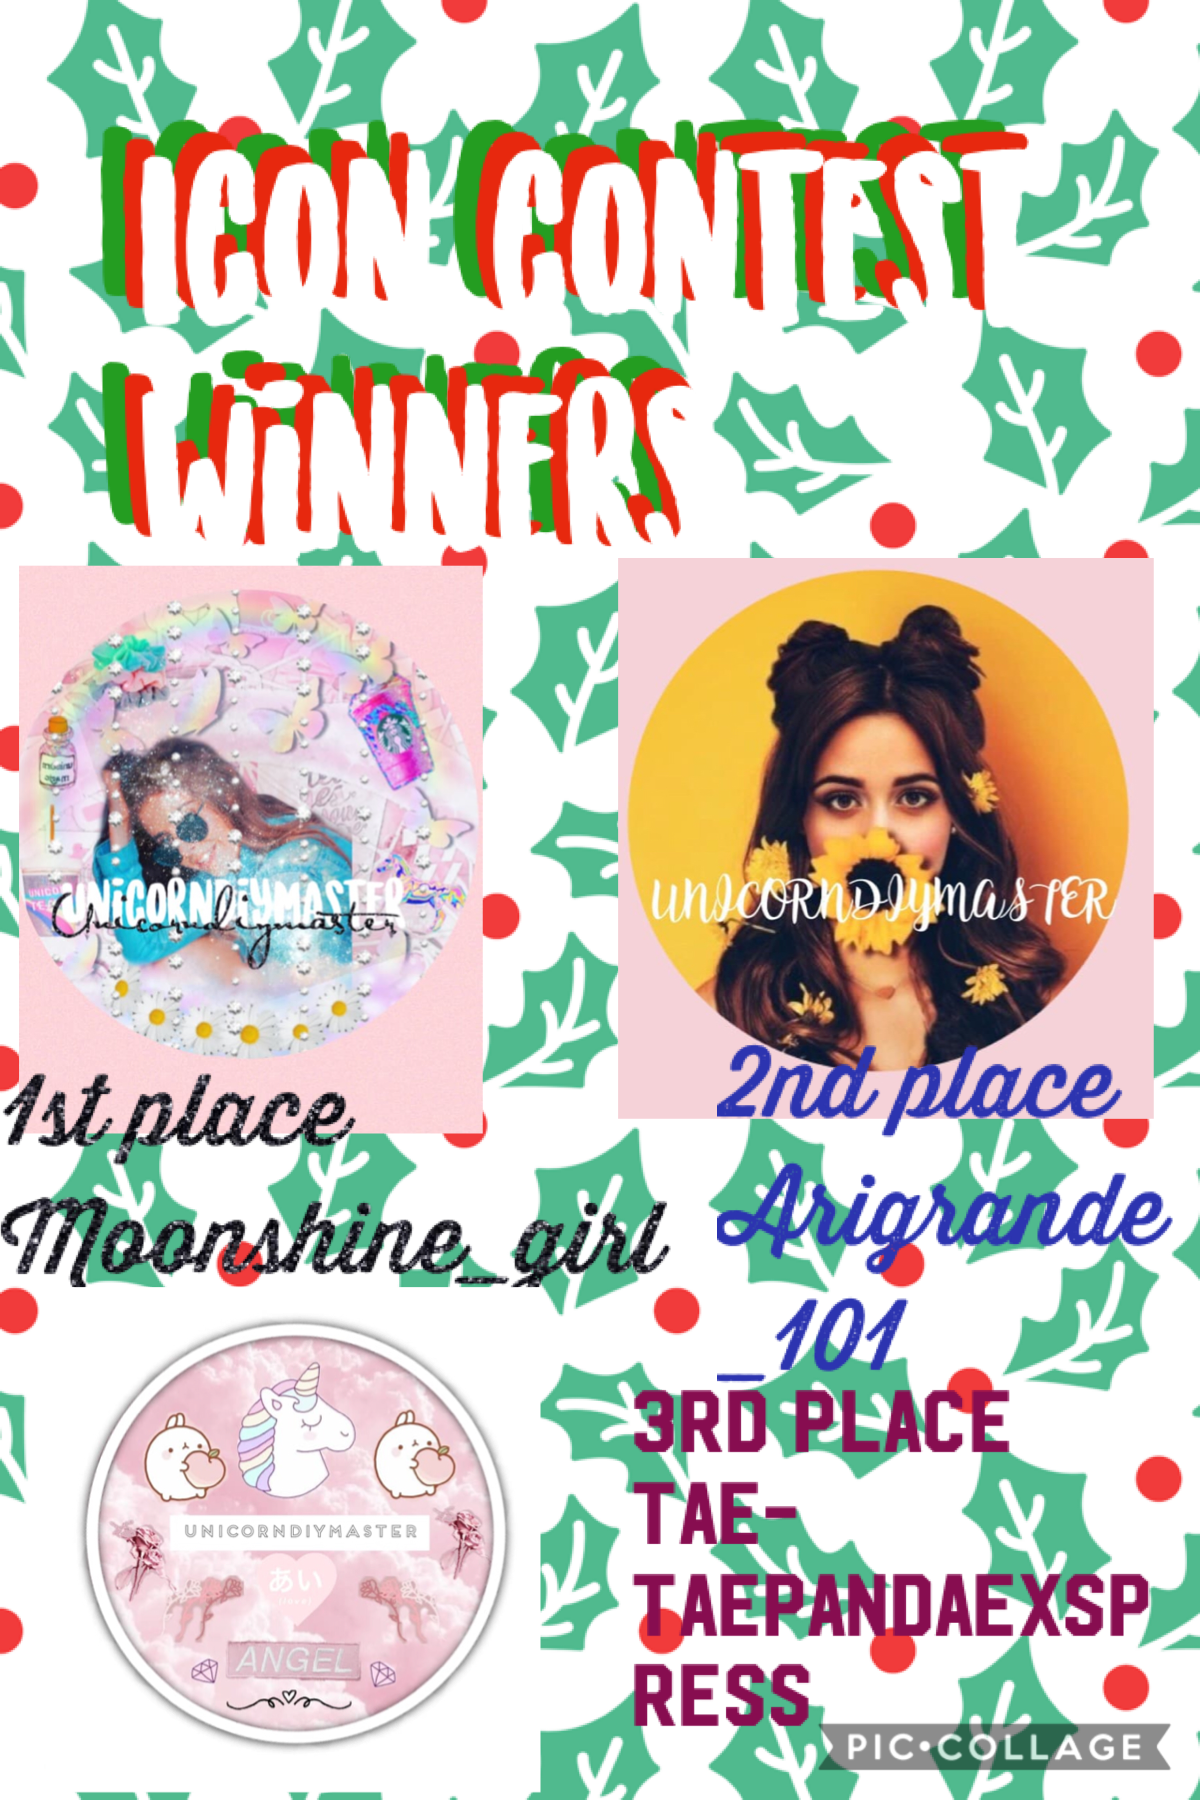 Prizes are in the next post and a BIG congrats to the contest winners!!!!!!!